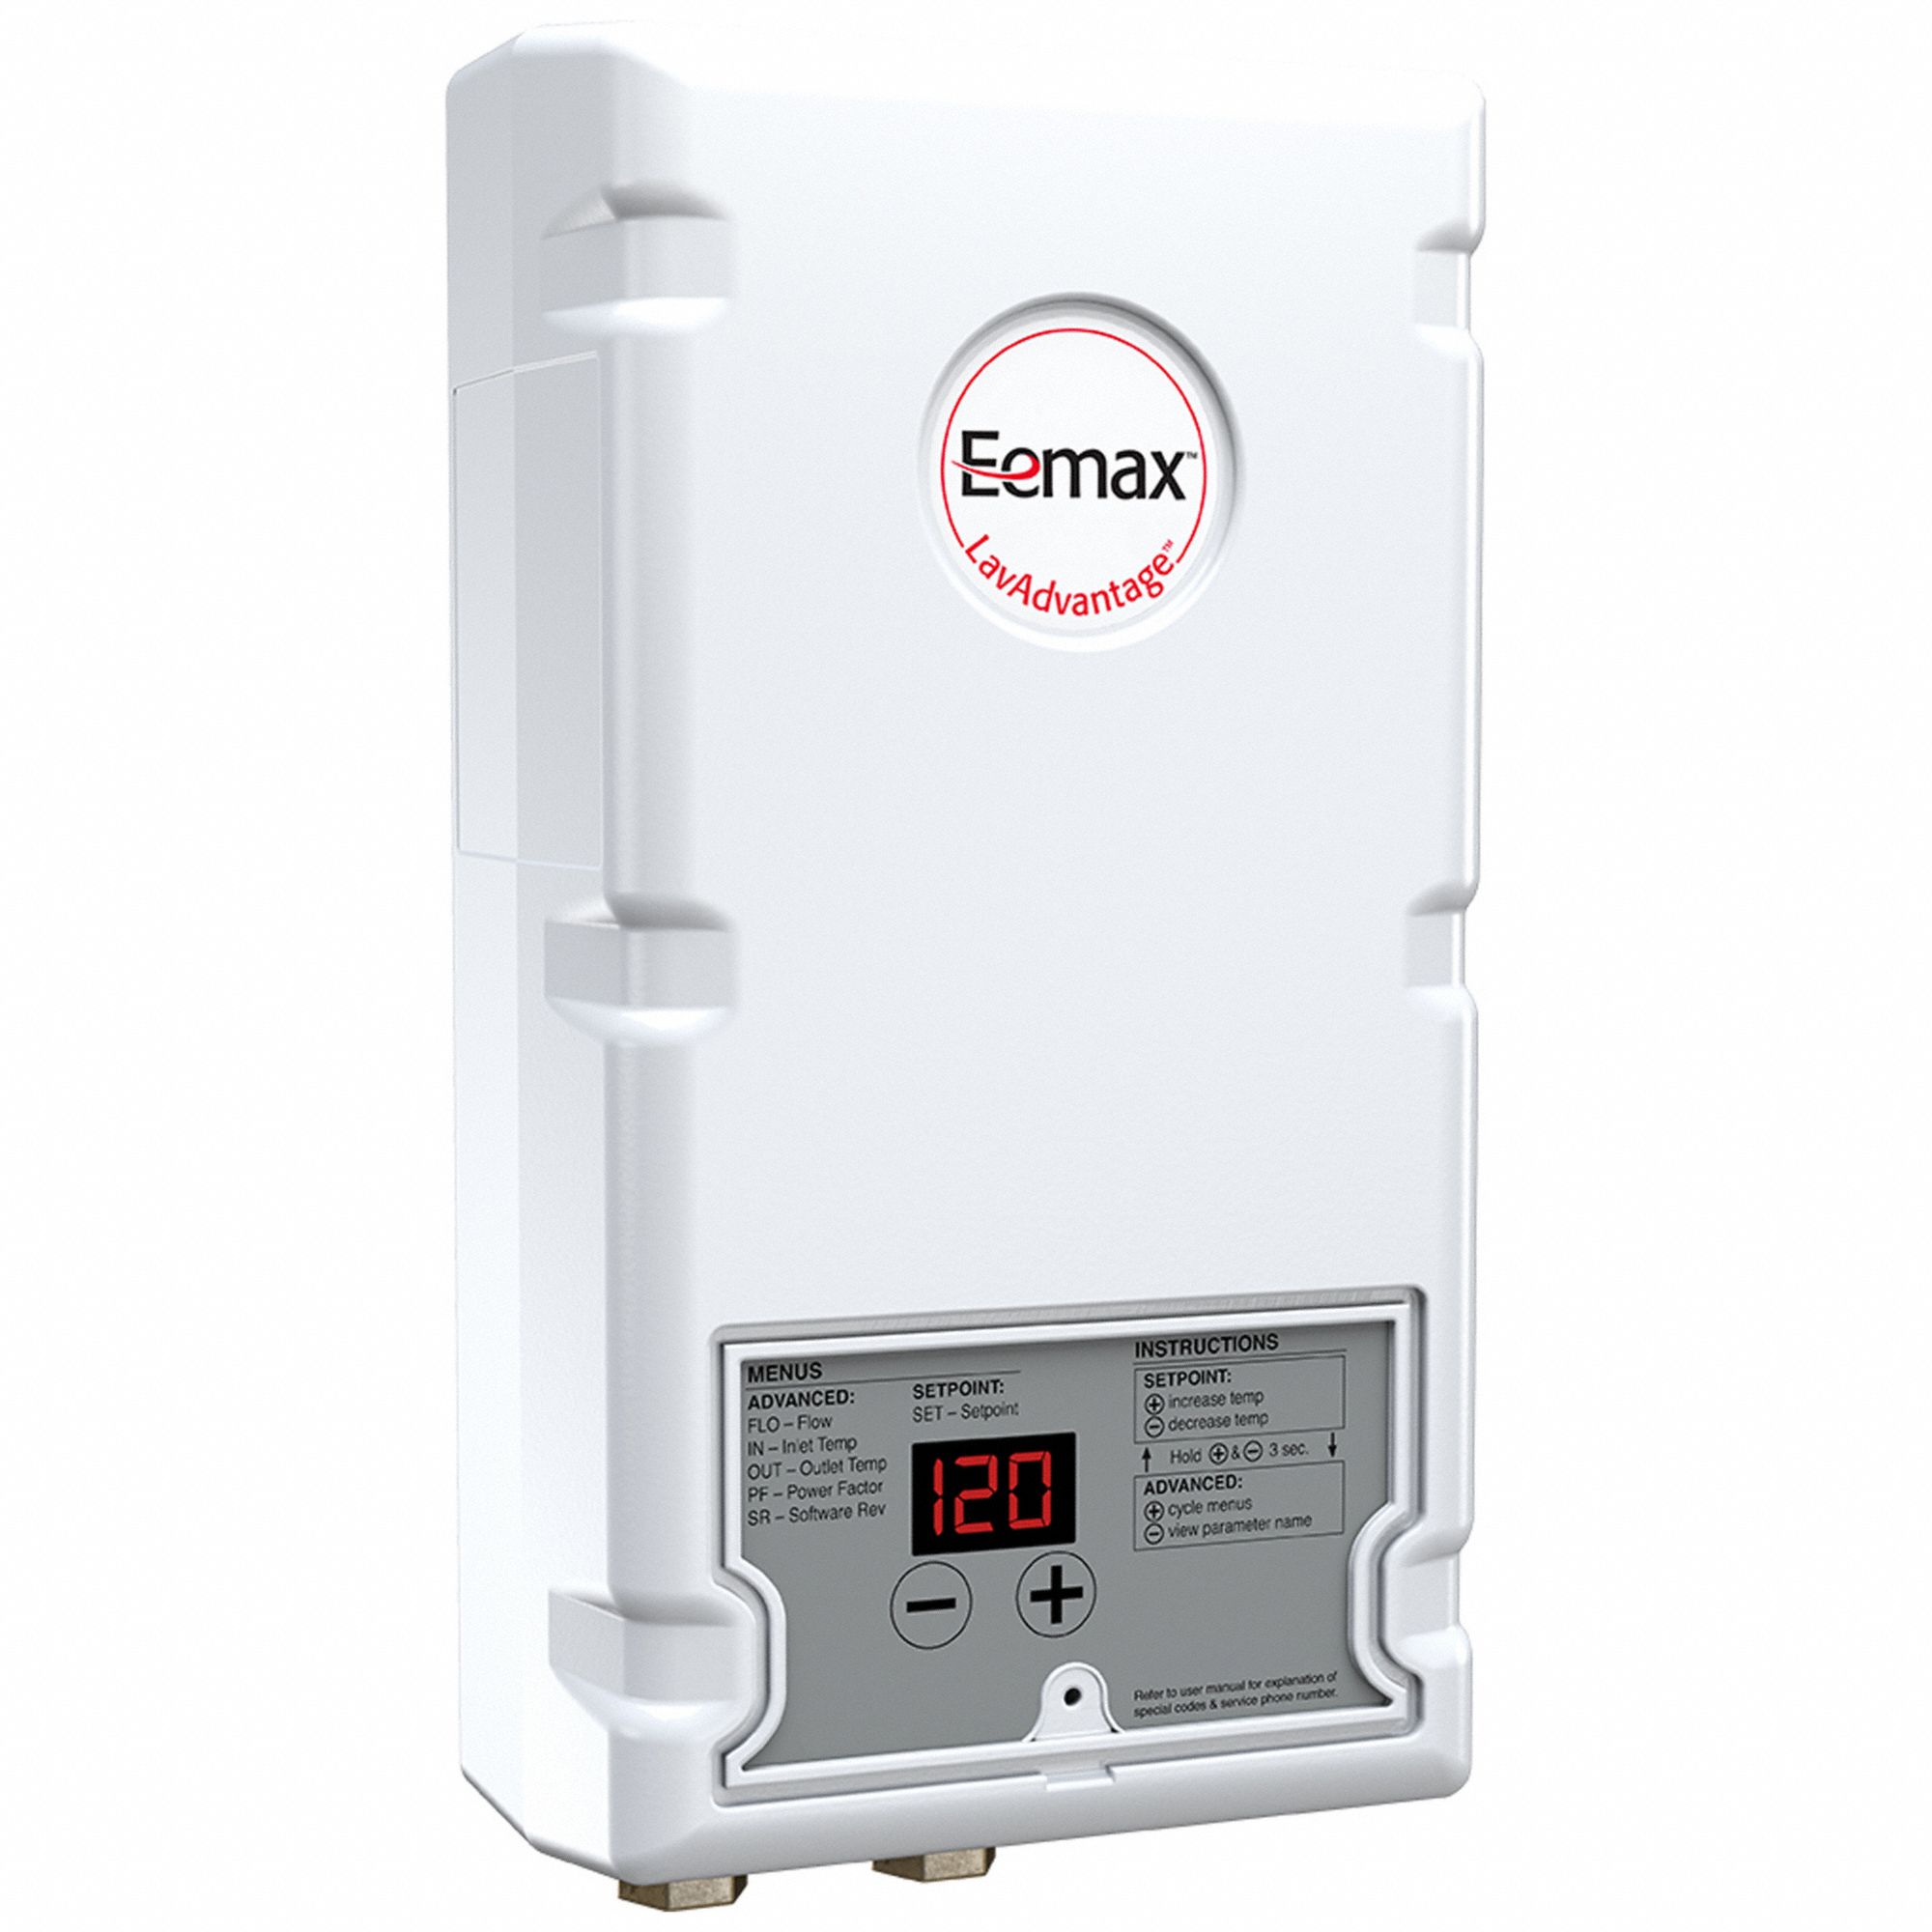 Electric Tankless Water Heater: 120 Volt, 3,000 W, 25 A, 1 Phase